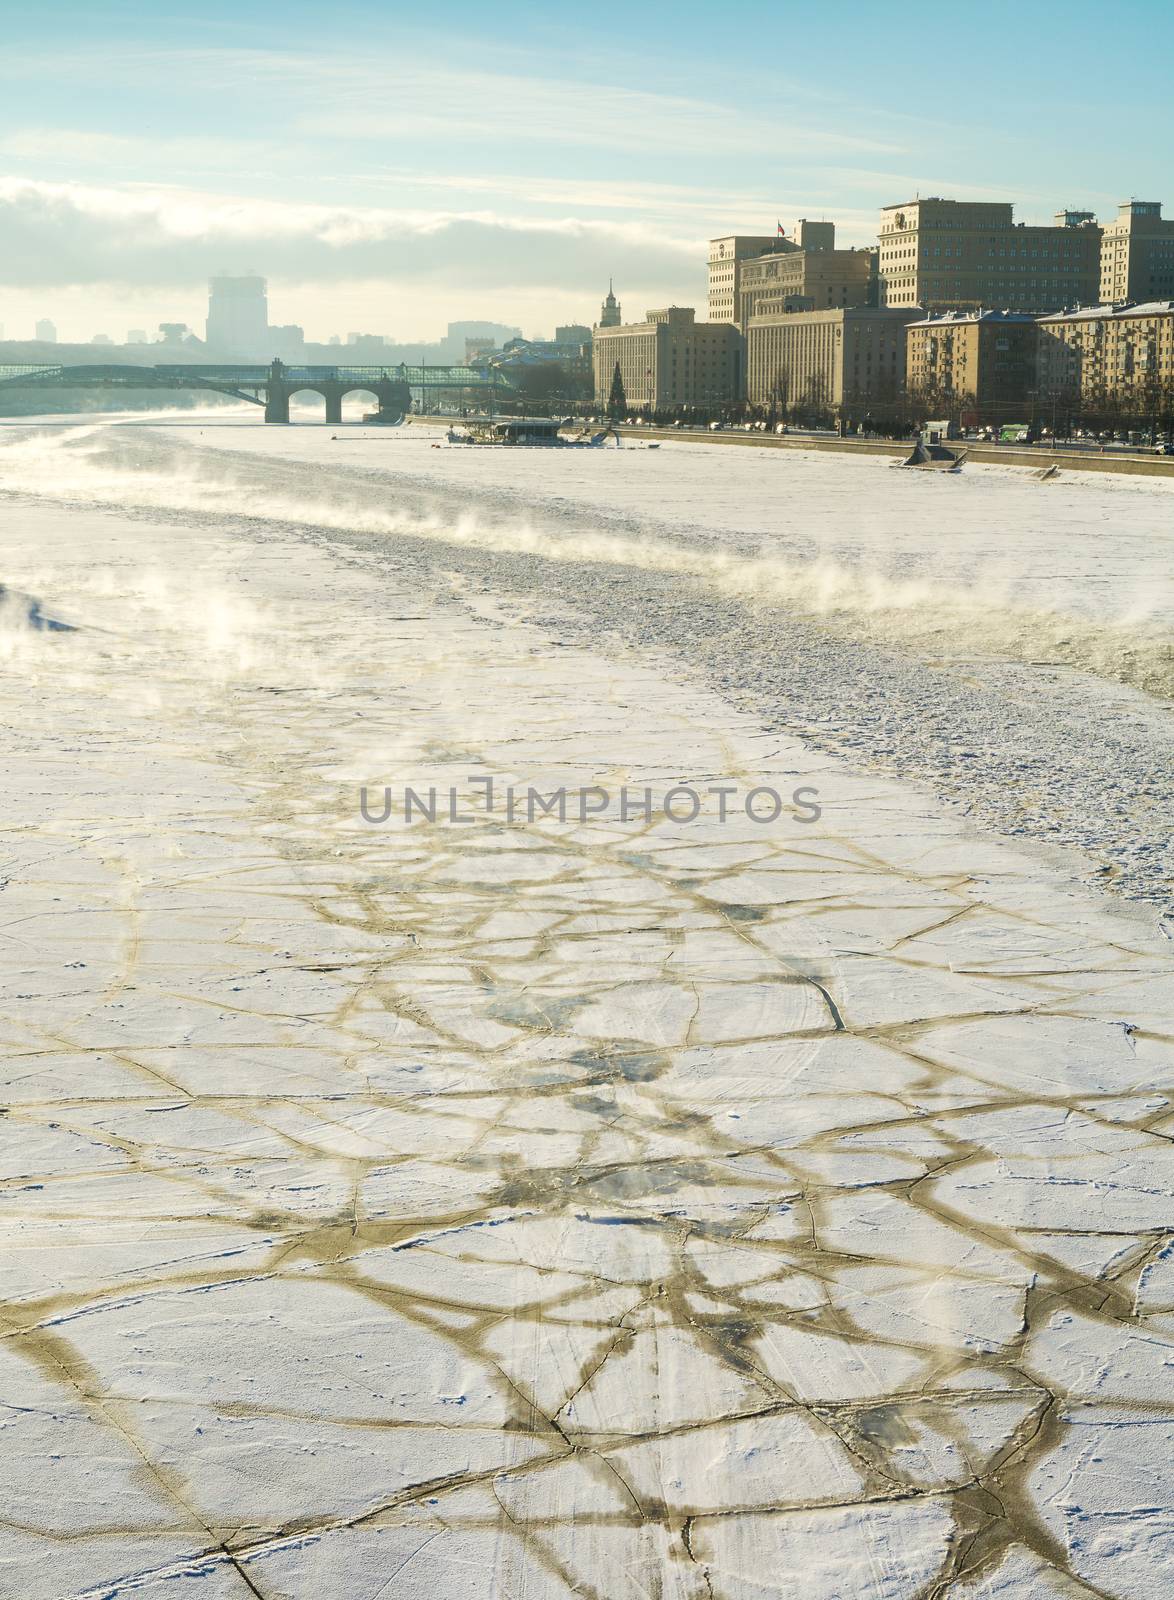 Frozen Moscow River, Embankment, Ministry of Defence, sunny wint by straannick